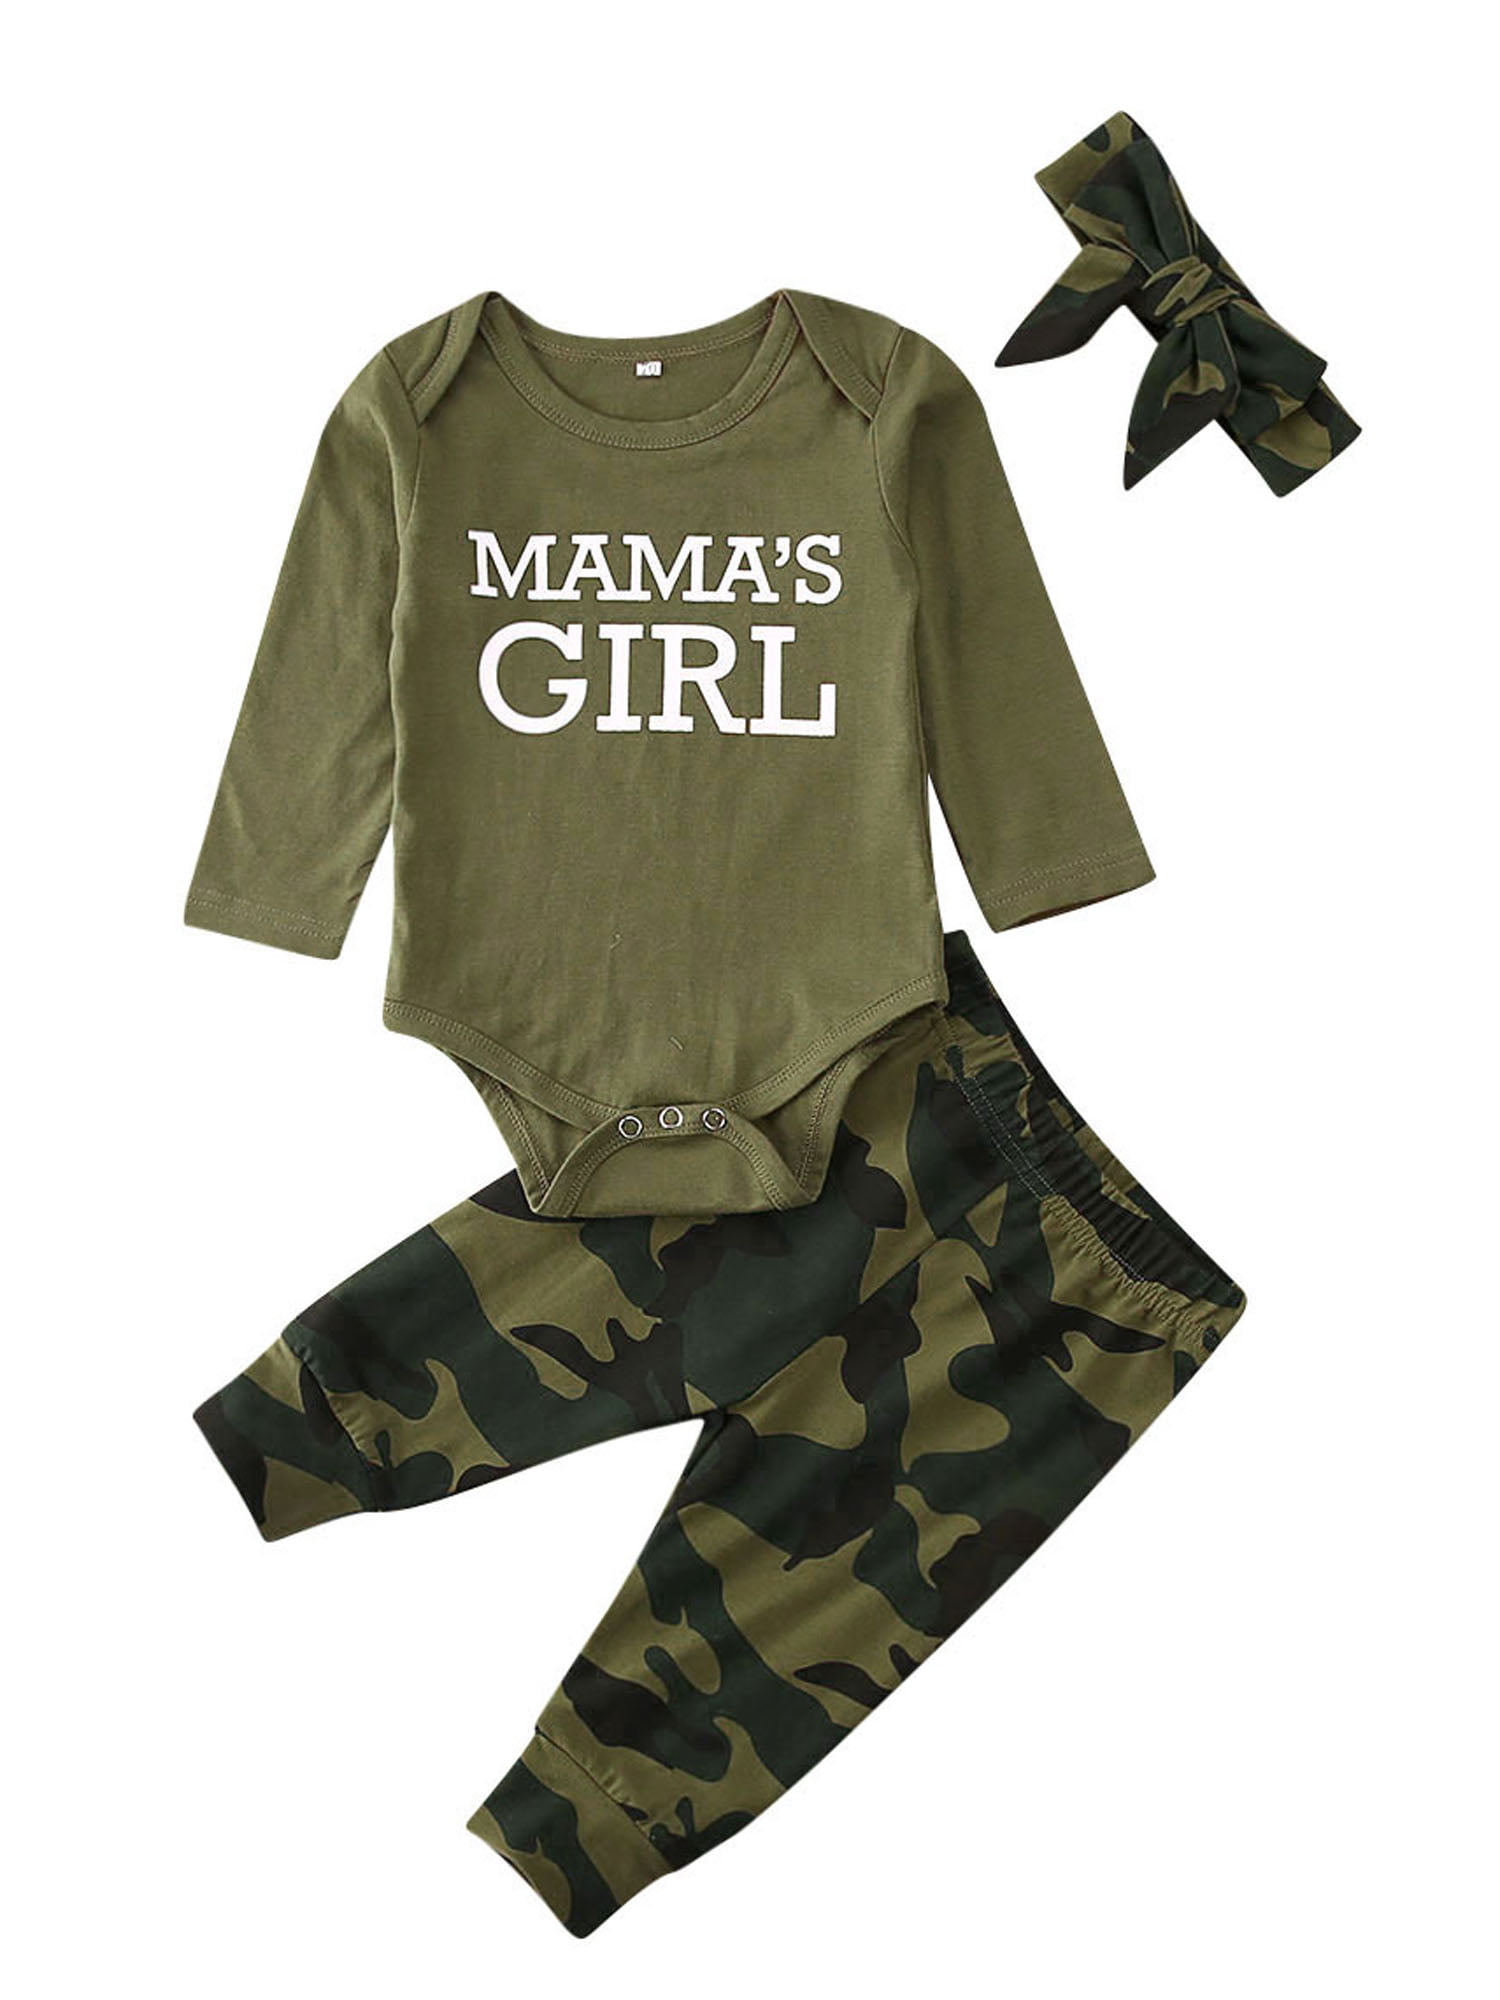 Newborn Boy Outfits Clothes Set Baby Camouflage Clothing Mama's BOY Long Sleeve Romper and Pants with Hat 0-24 Months